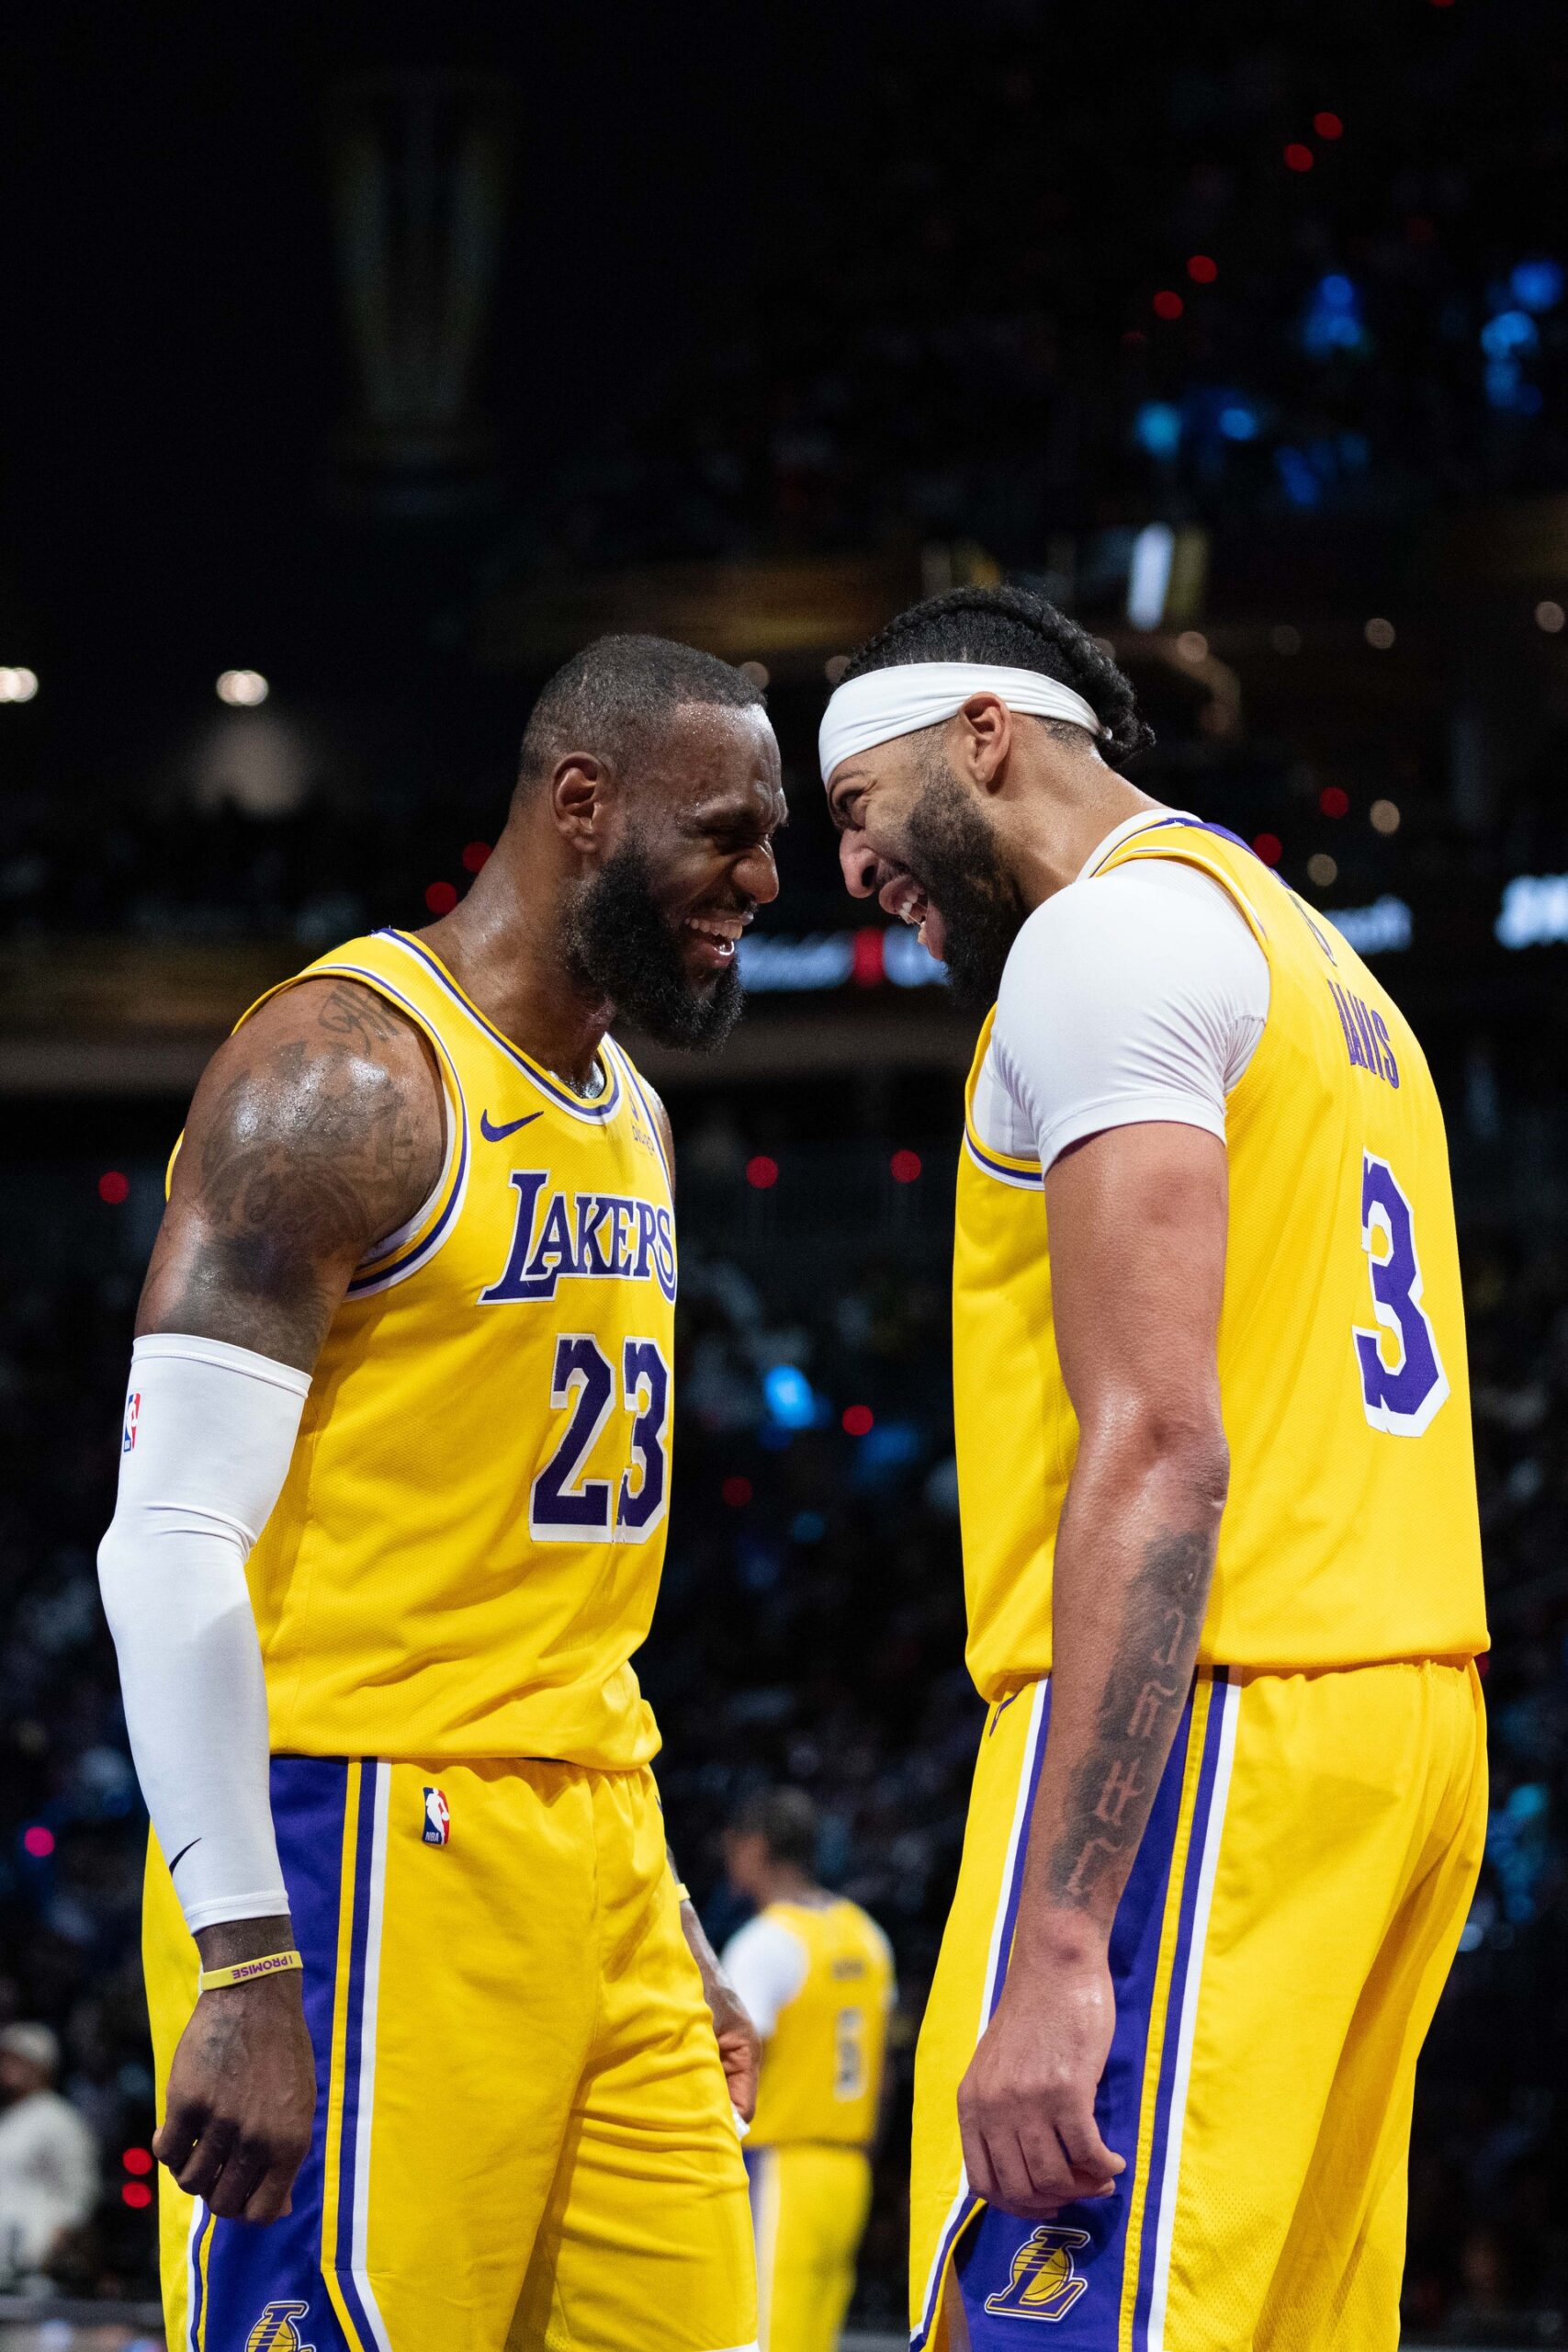 Los Angeles Lakers forward LeBron James (23) and forward Anthony Davis (3) celebrate after winning the in season tournament championship final against the Indiana Pacers at T-Mobile Arena.